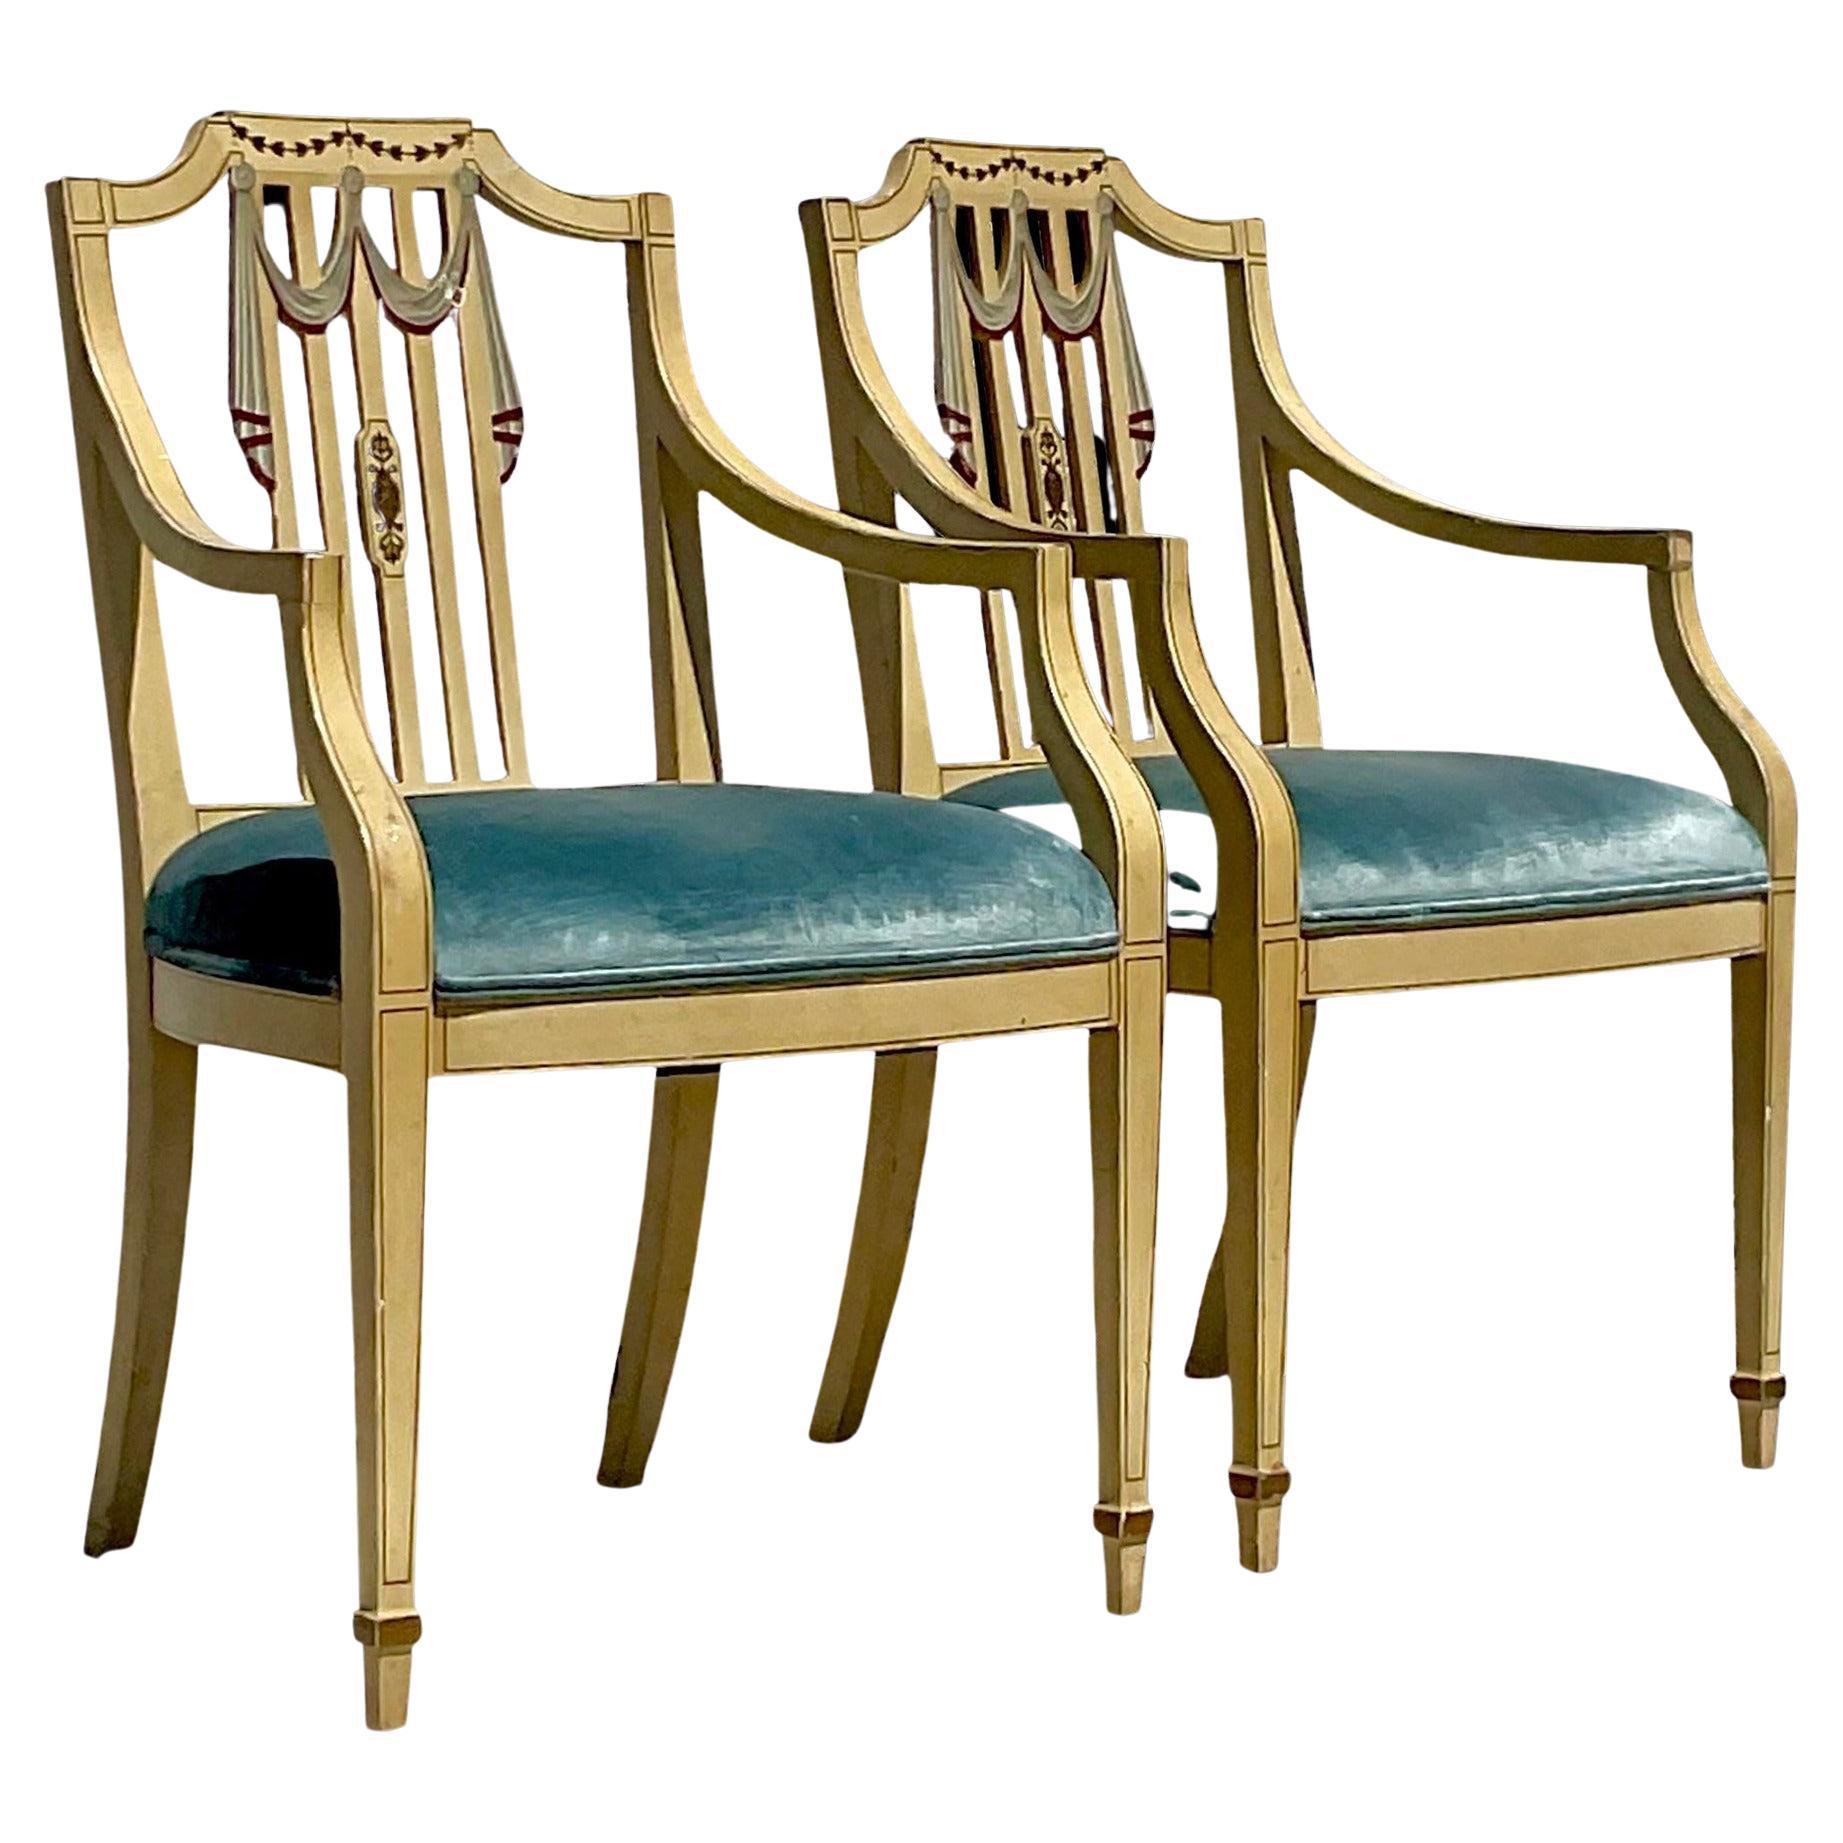 Vintage Regency Hand Painted Tromp L’oiel Swag Arm Chairs, a Pair For Sale